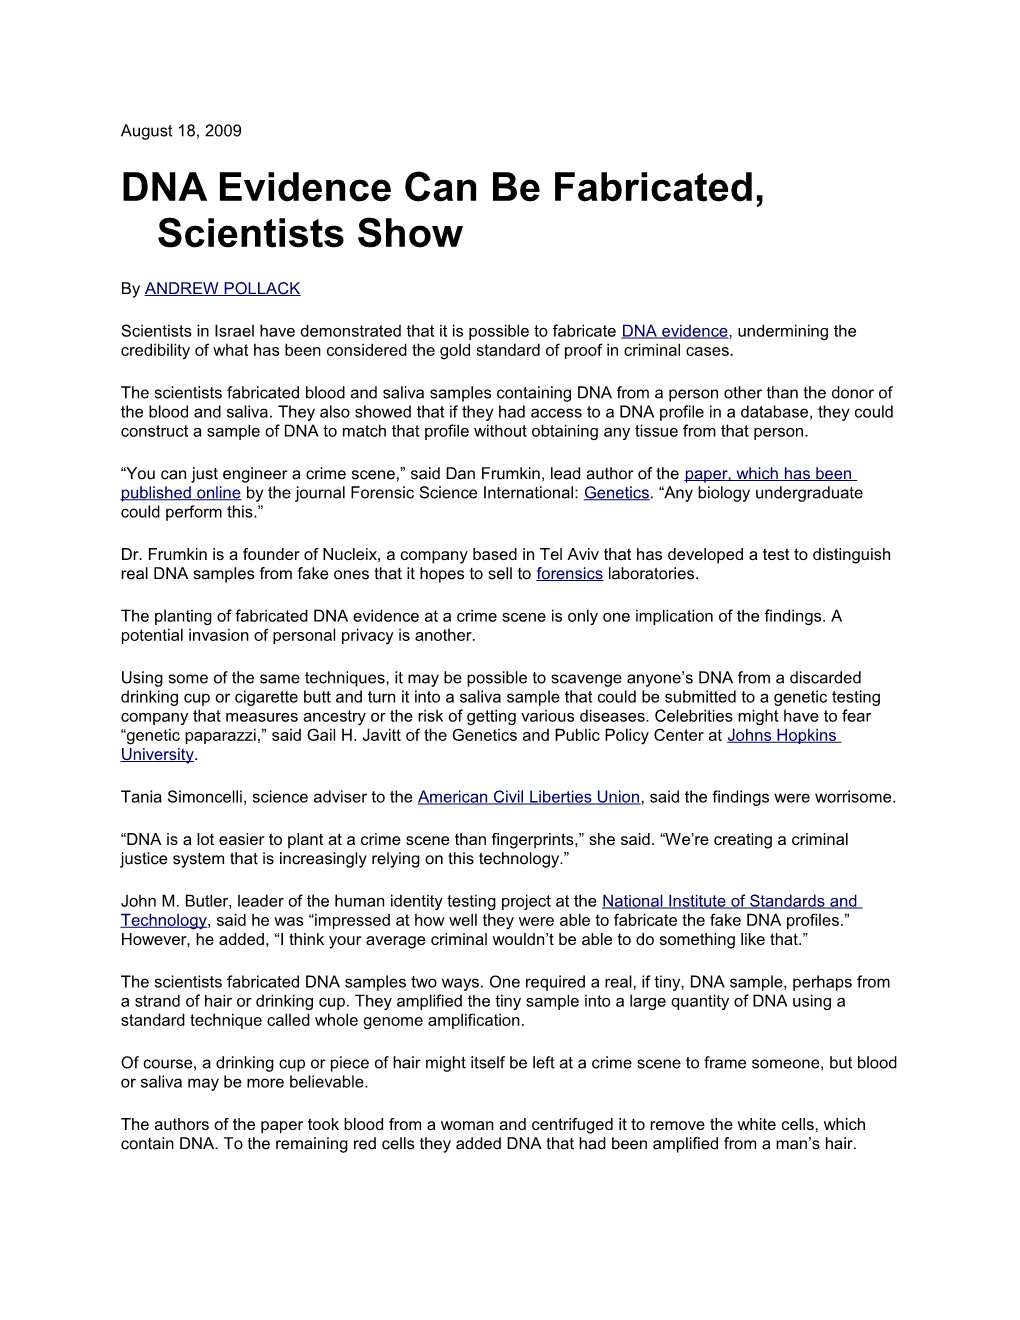 DNA Evidence Can Be Fabricated, Scientists Show